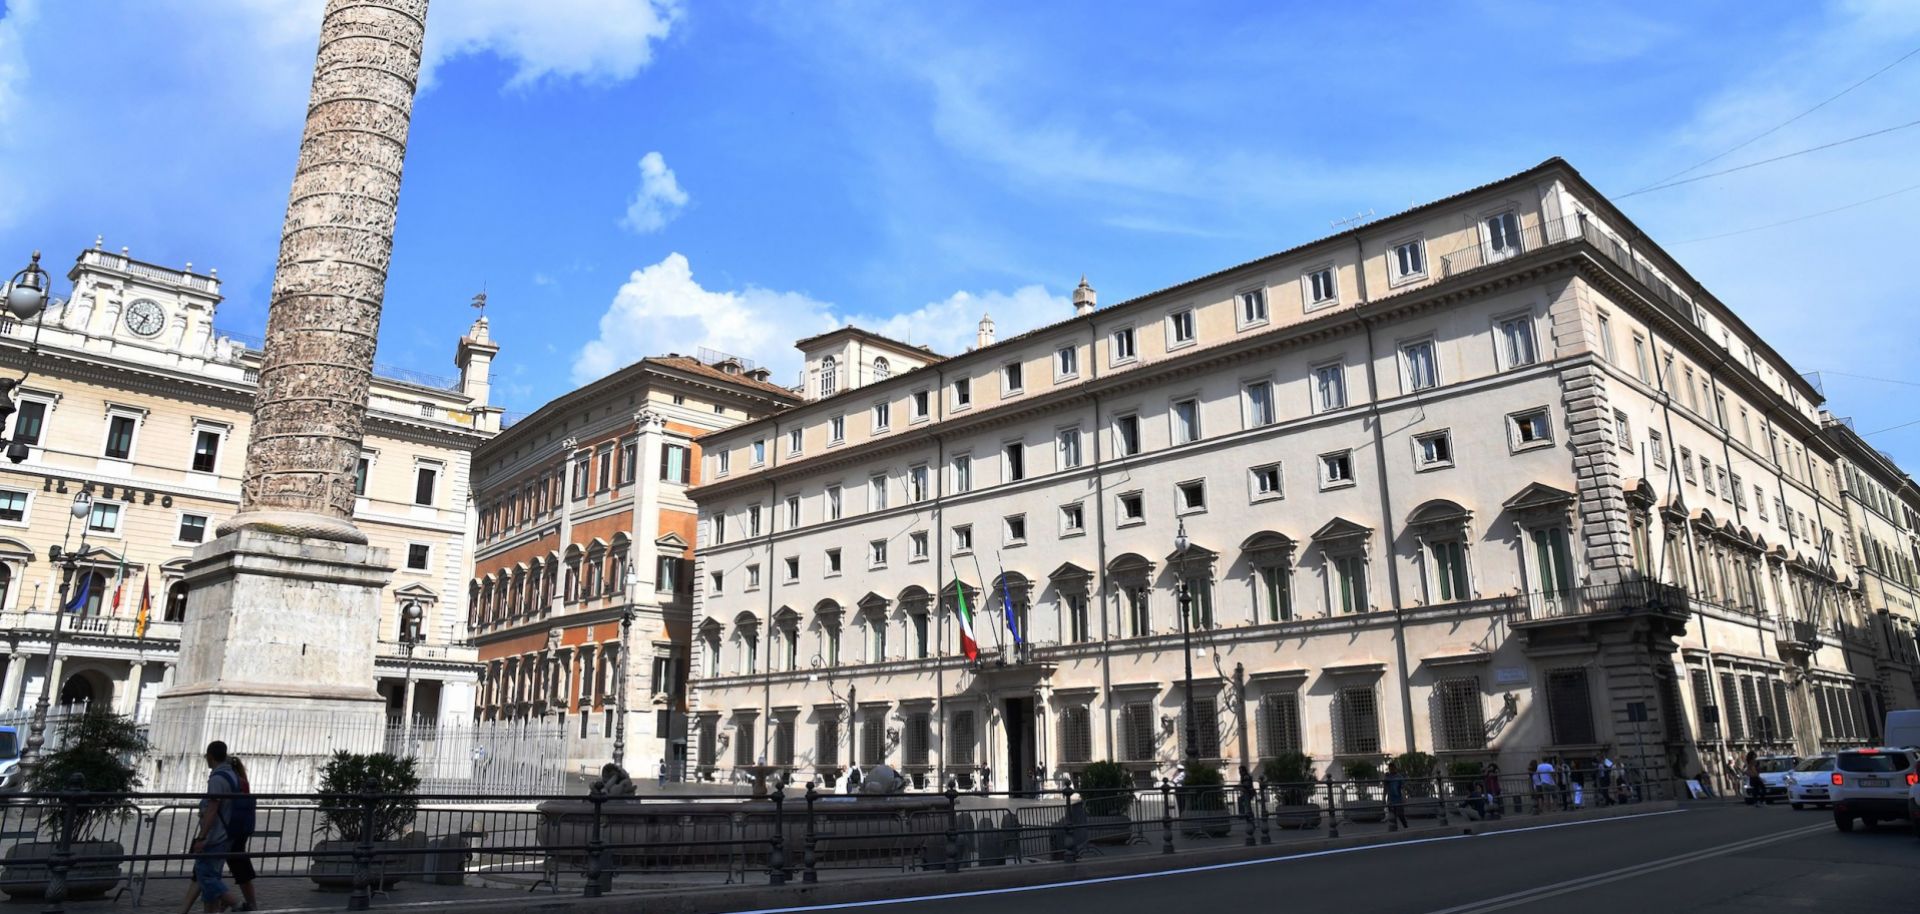 The Palazzo Chigi, the official residence of the Italian government.